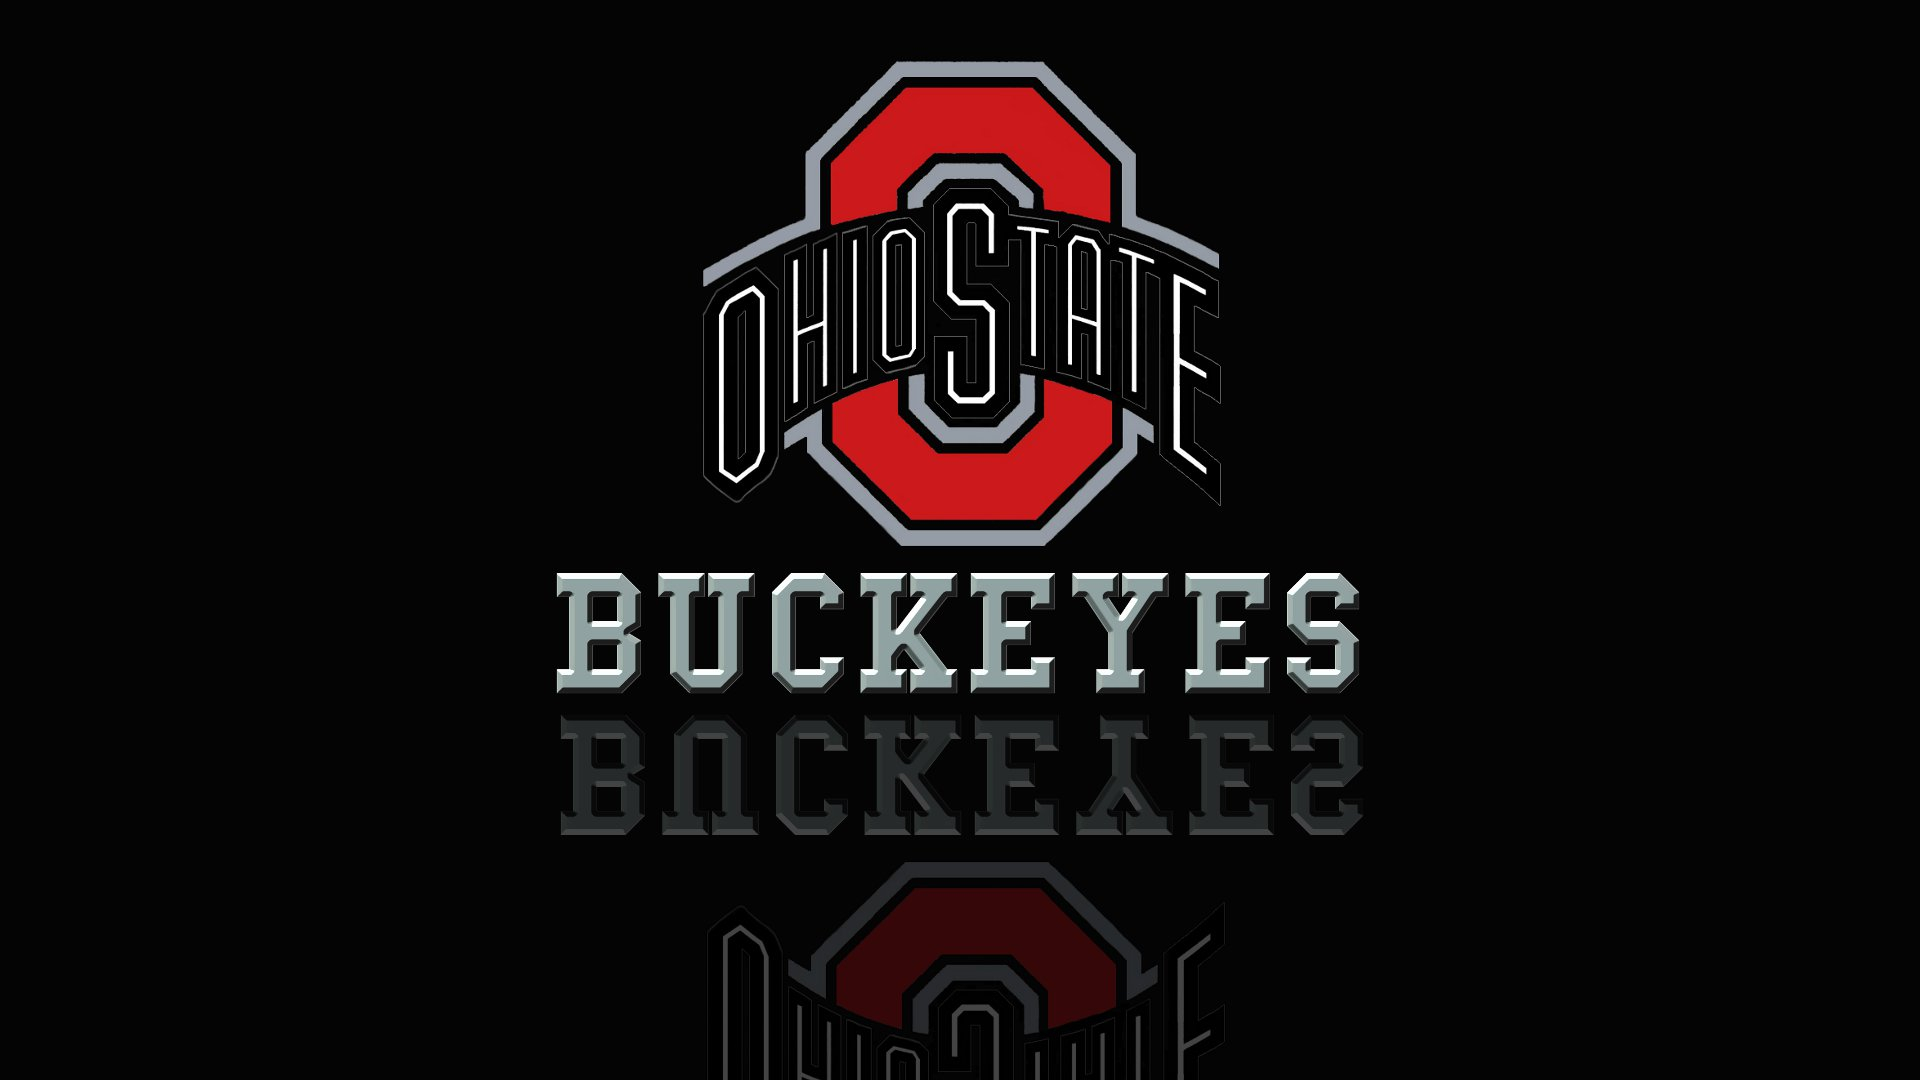 1920x1080 Free download Ohio State Buckeyes Football Wallpaper [] for your Desktop, Mobile \u0026 Tablet | Explore 69+ Ohio State University Wallpaper | Ohio State Buckeyes Wallpaper, Ohio State Buckeyes Wallpaper Border, Ohi